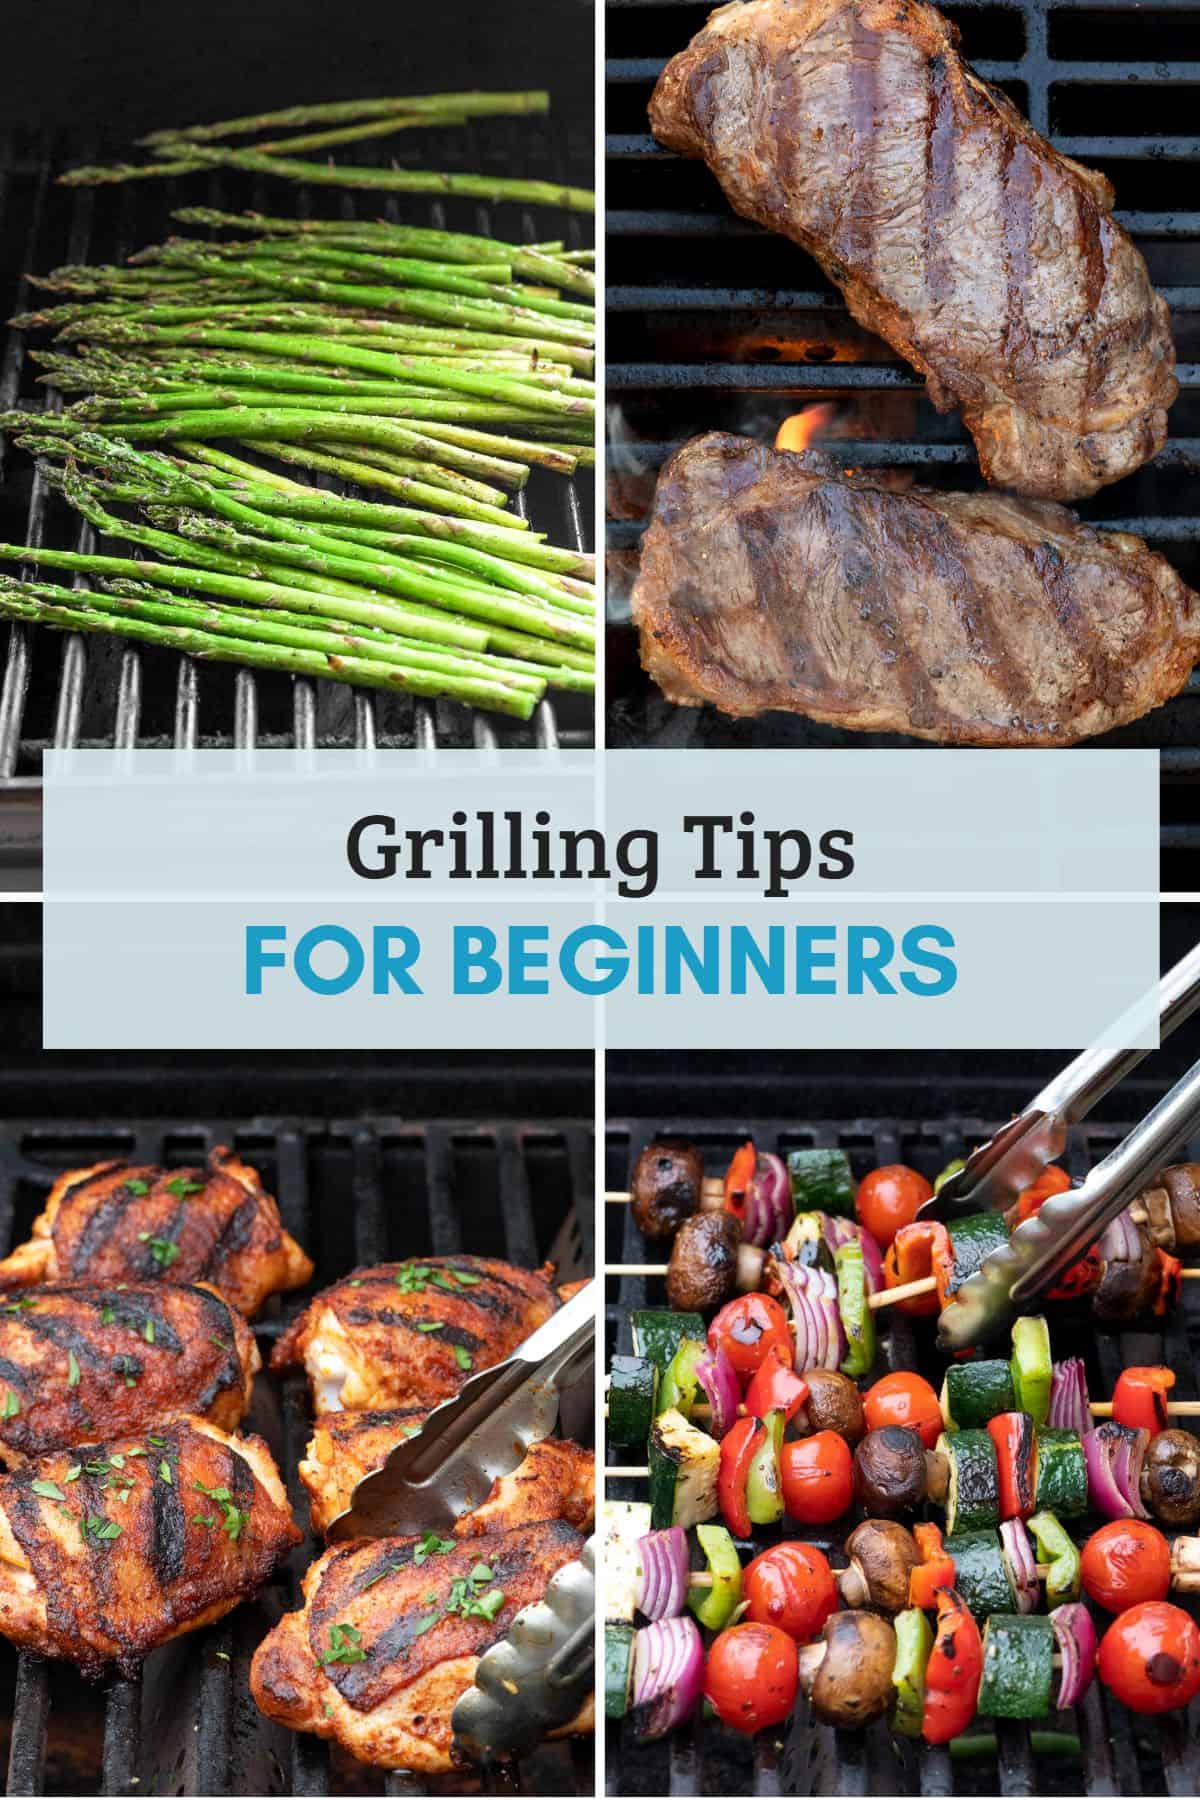 How to Grill With Gas: A Beginner's Guide